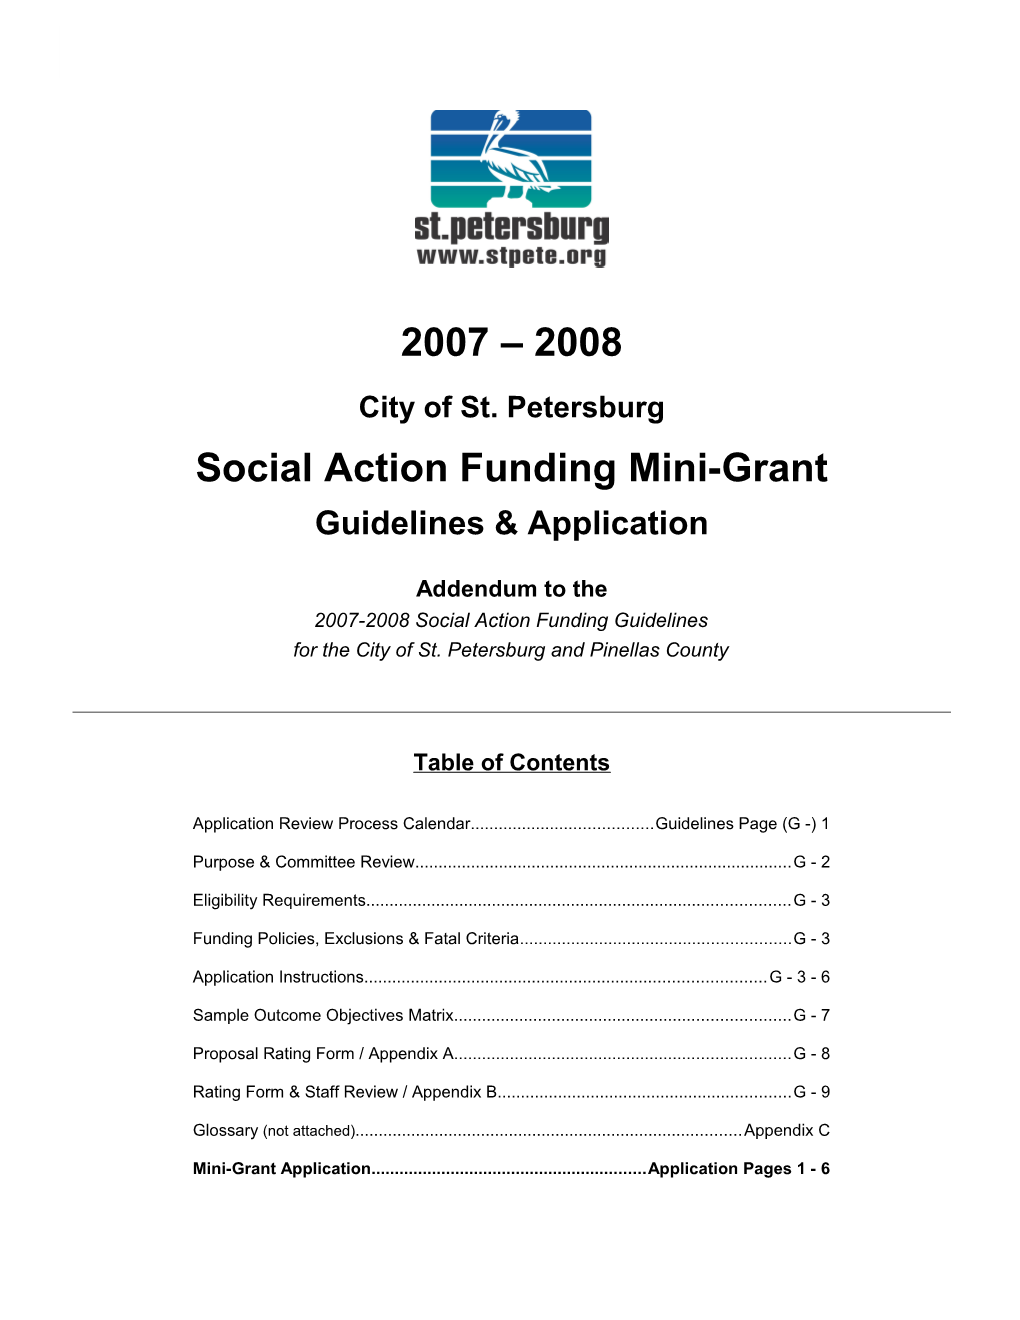 City of St. Petersburg Mini-Grant Guidelines FY 2008 Guidelines Page 1